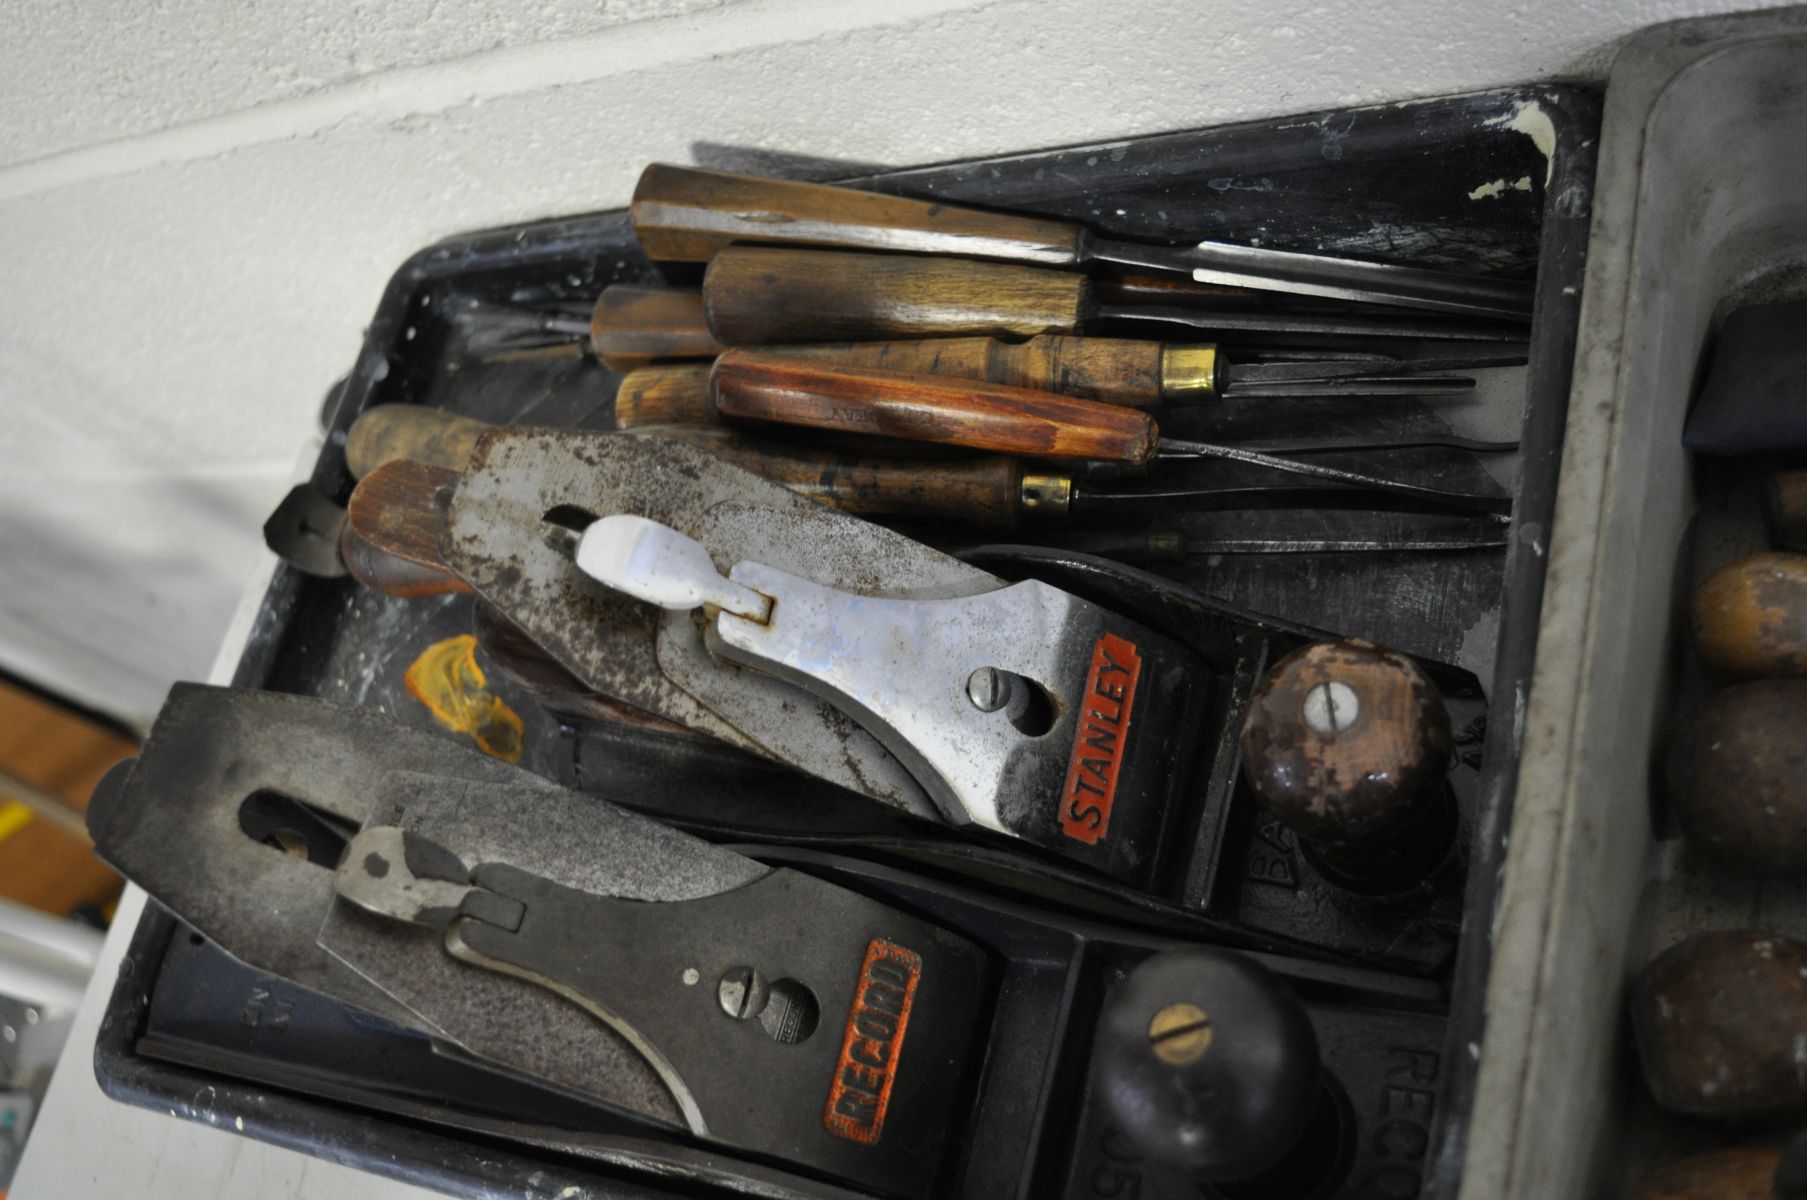 TWO TRAYS CONTAINING WOODWORKING TOOLS including wood carving tools, a Record No 5 1/2 plane, a - Image 3 of 3